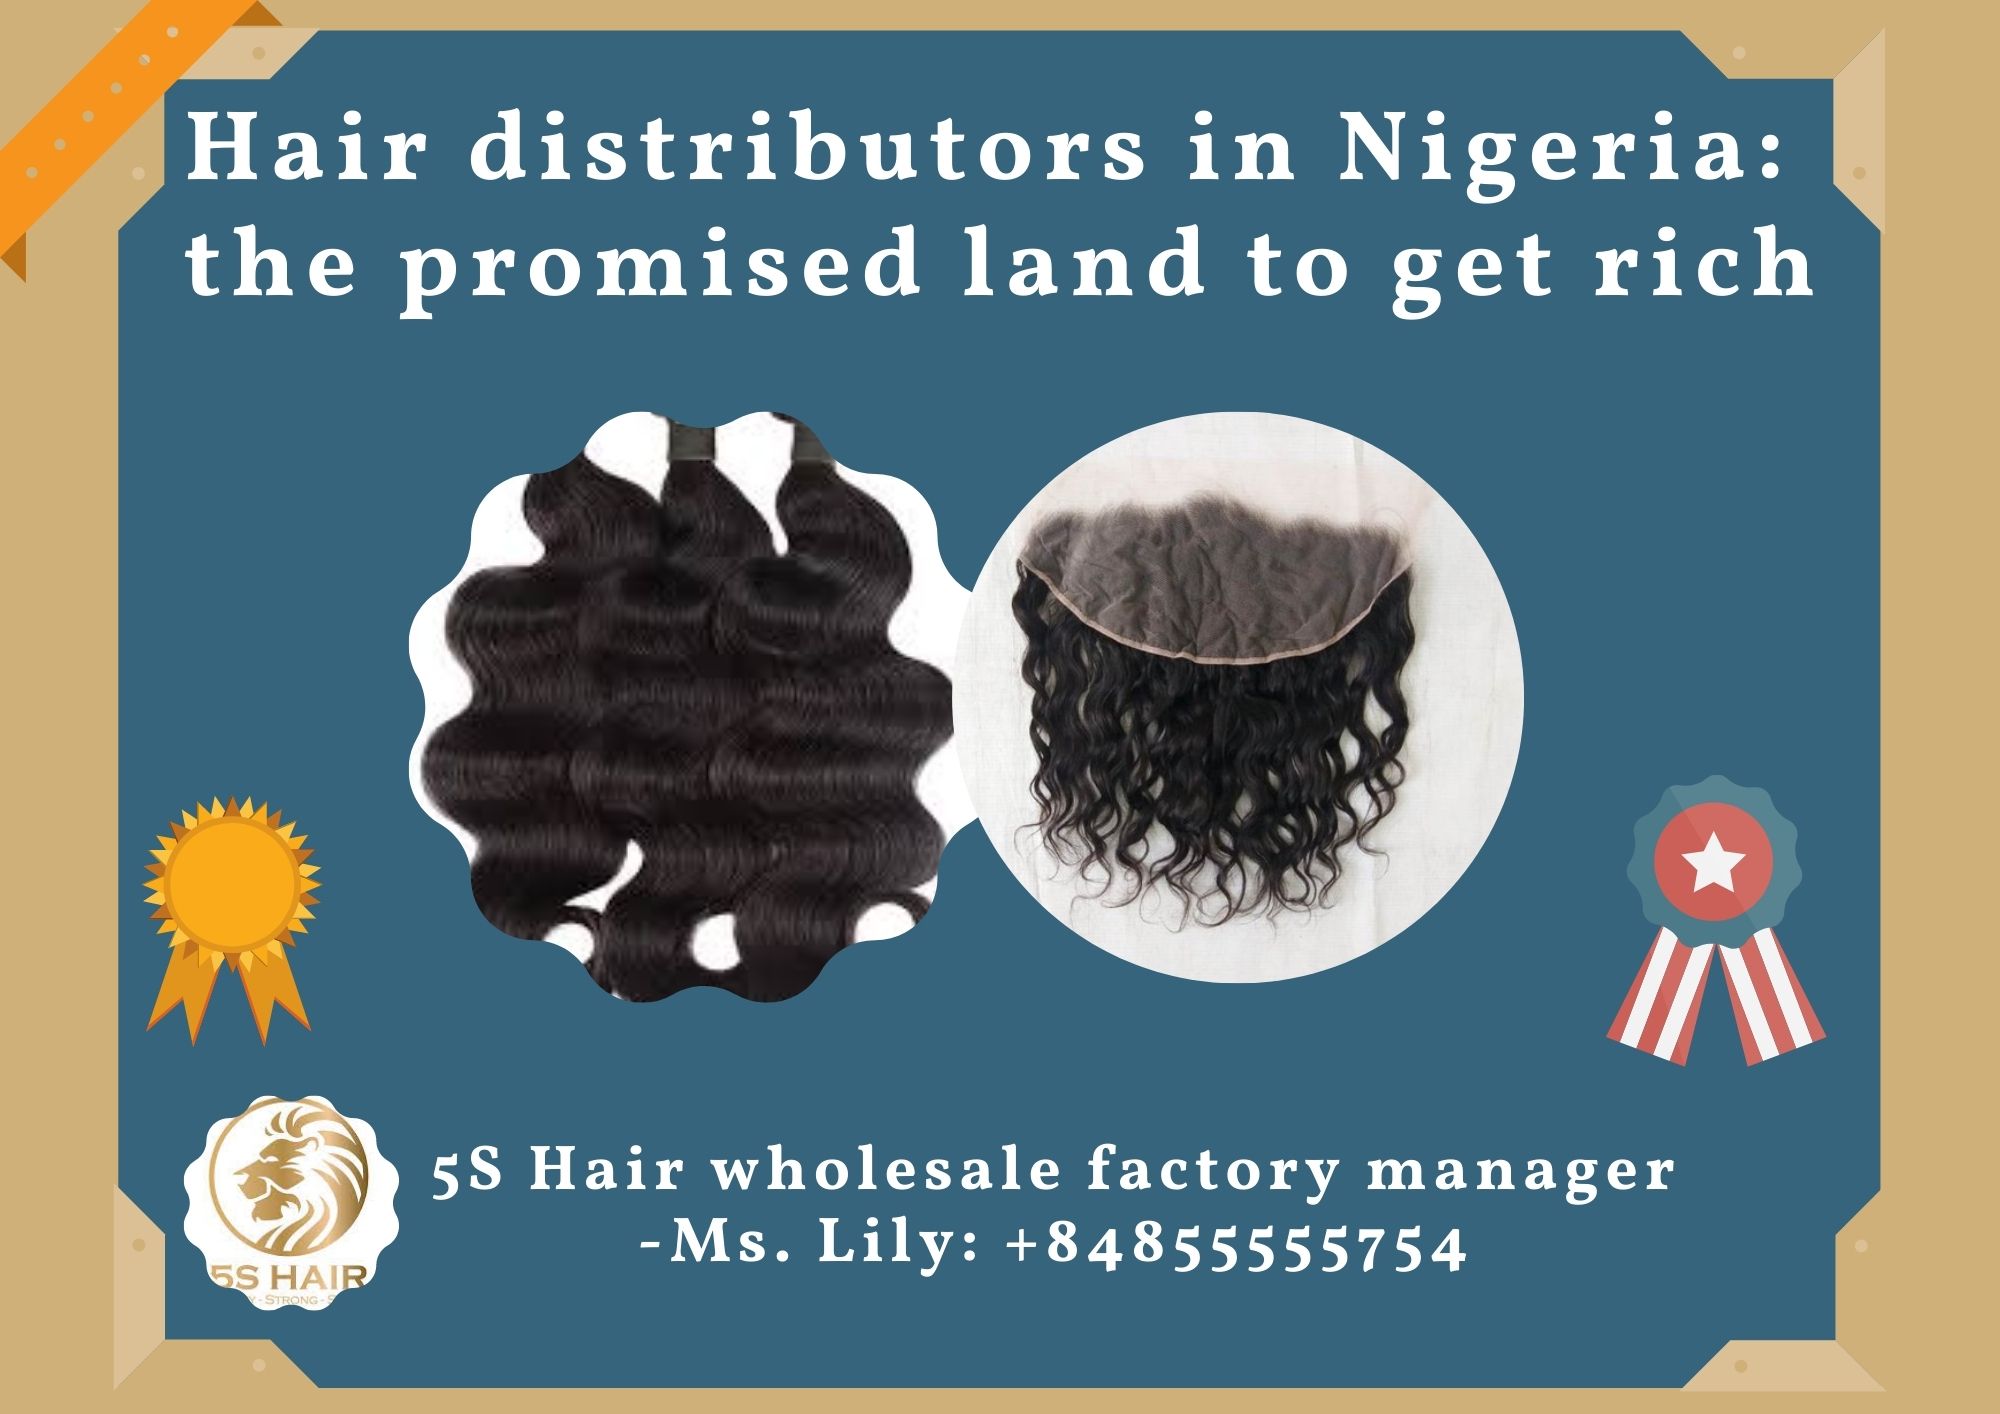 Hair distributors in Nigeria: the promised land to get rich